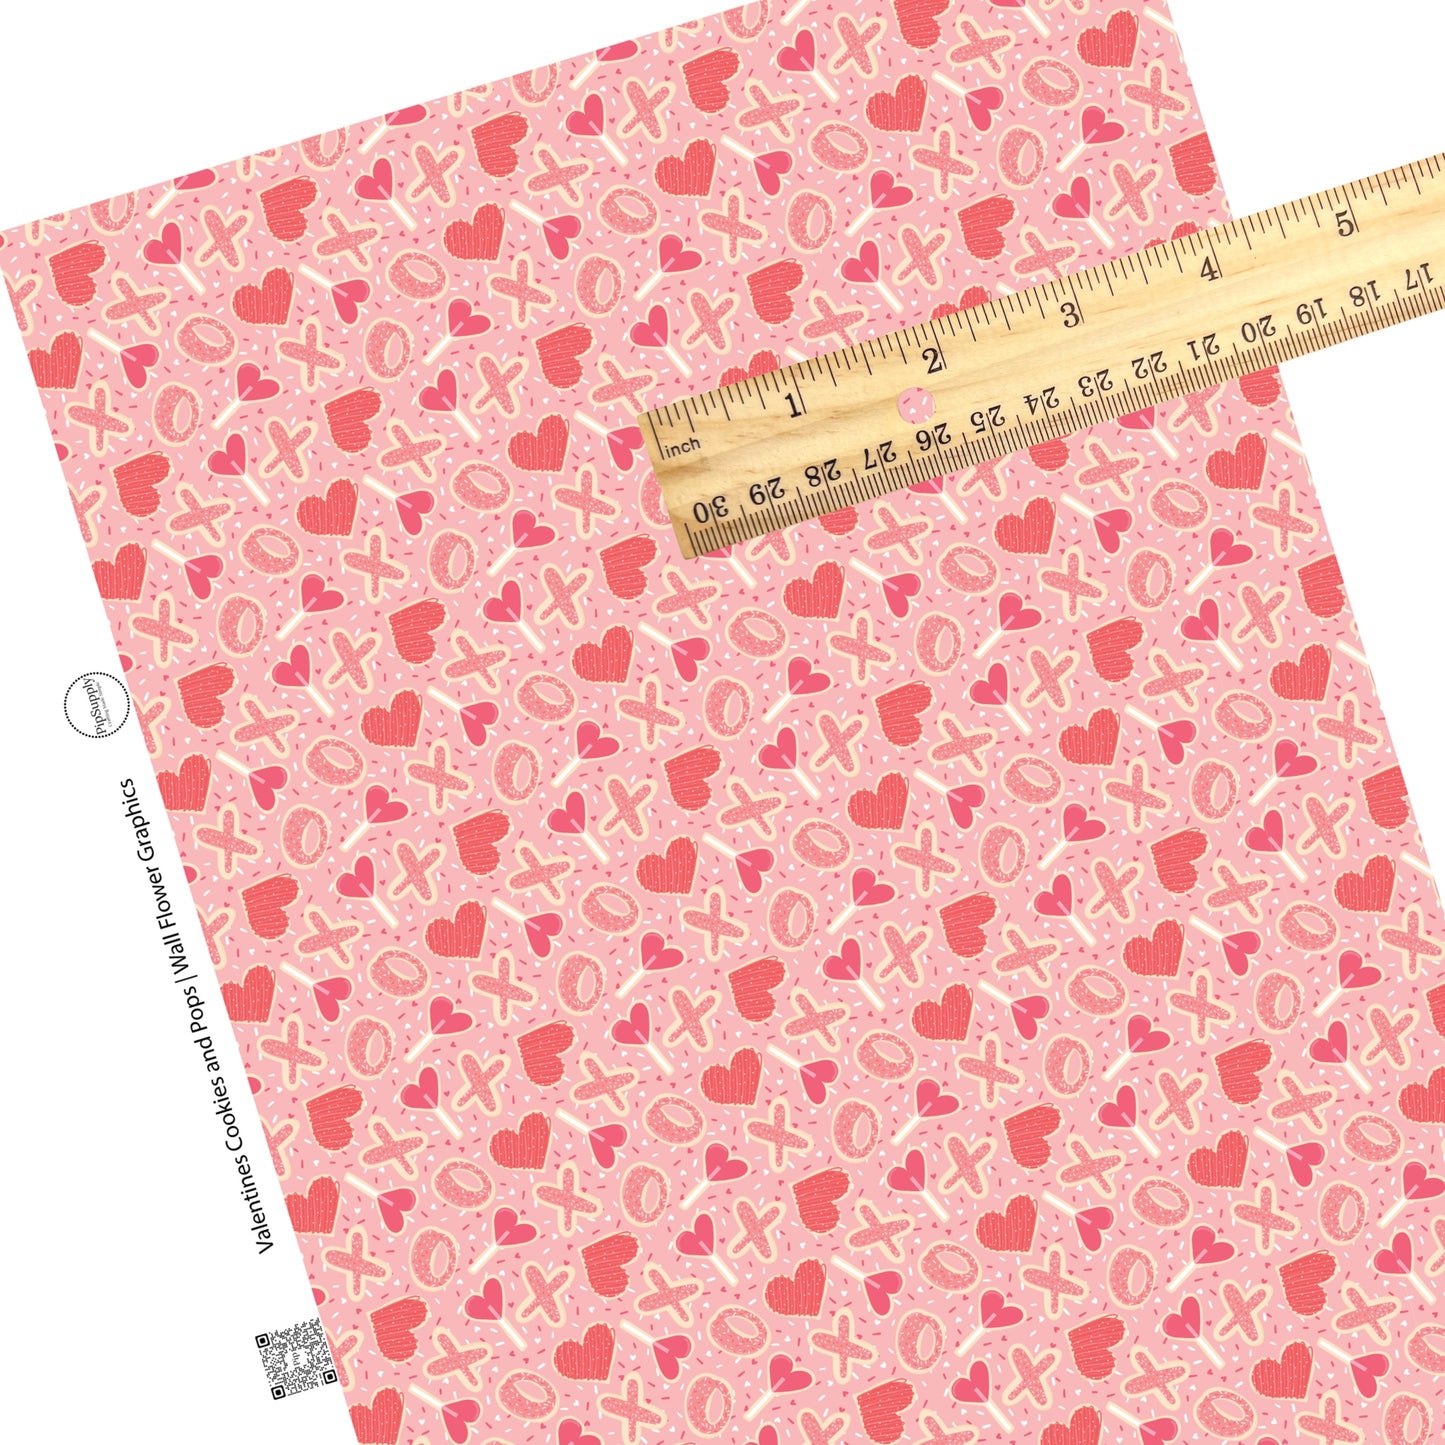 Sprinkles, hearts, lollipops, and cookies on pink faux leather sheets